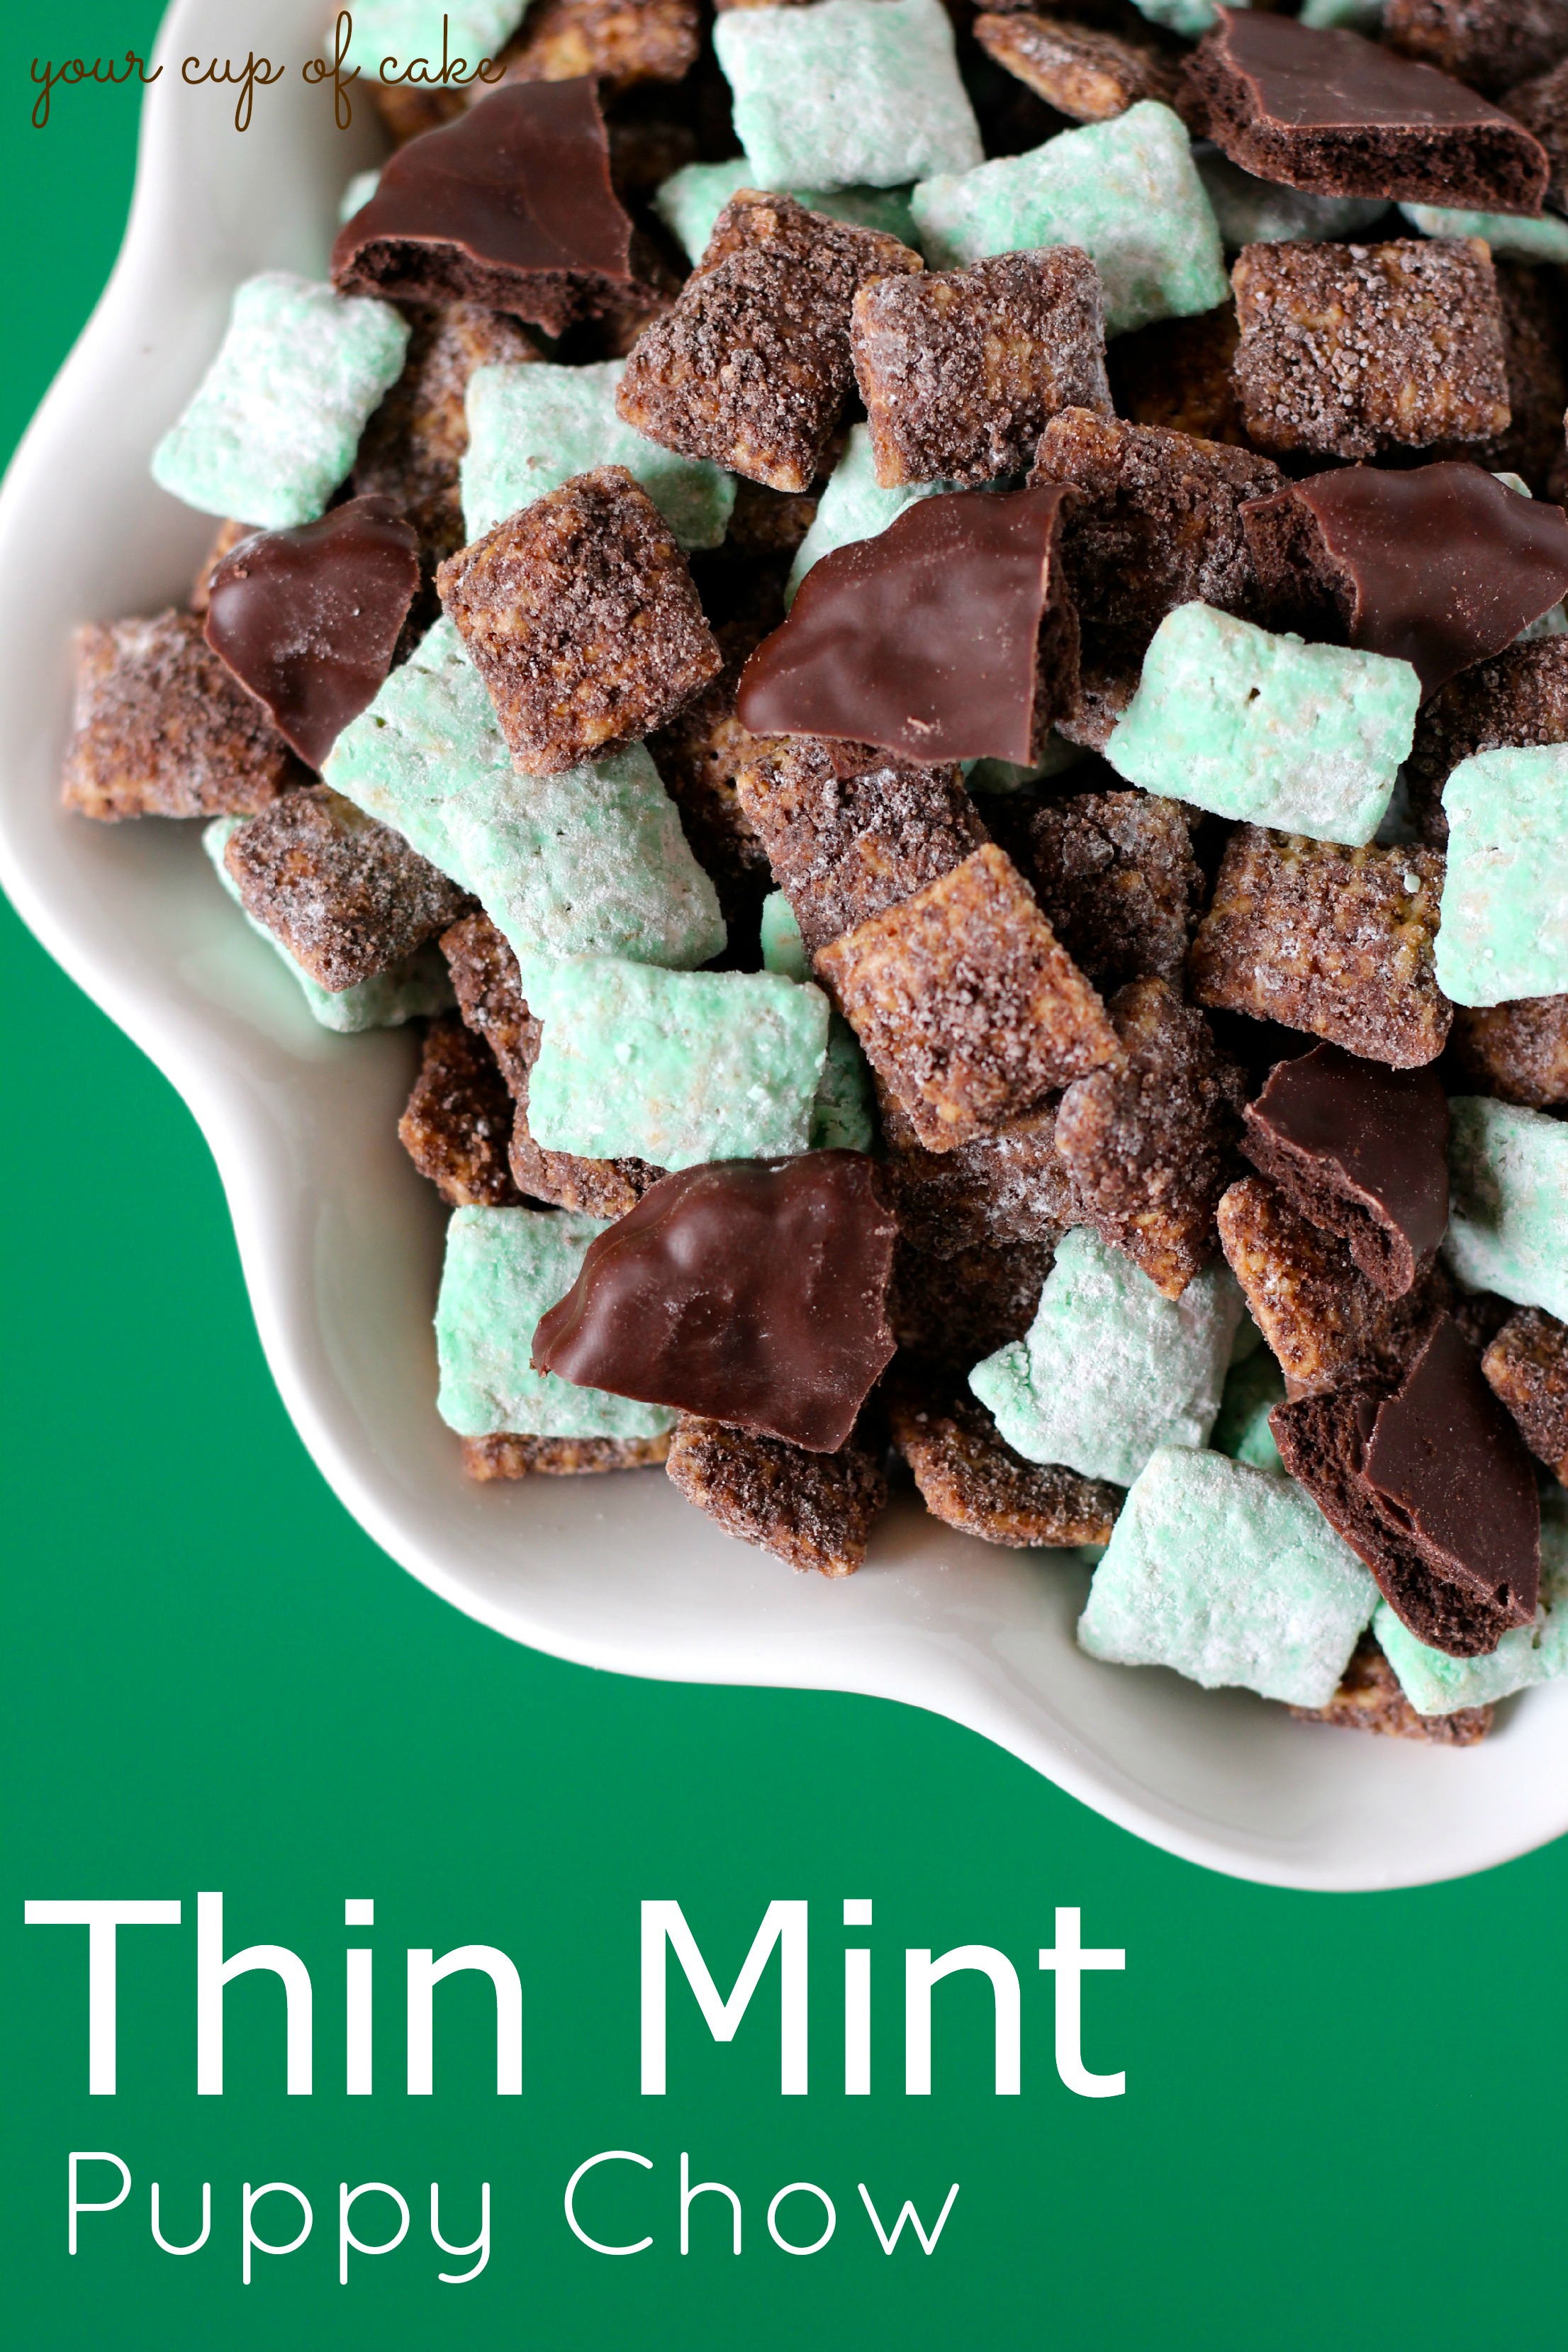 Thin Mint Puppy Chow - Your Cup of Cake